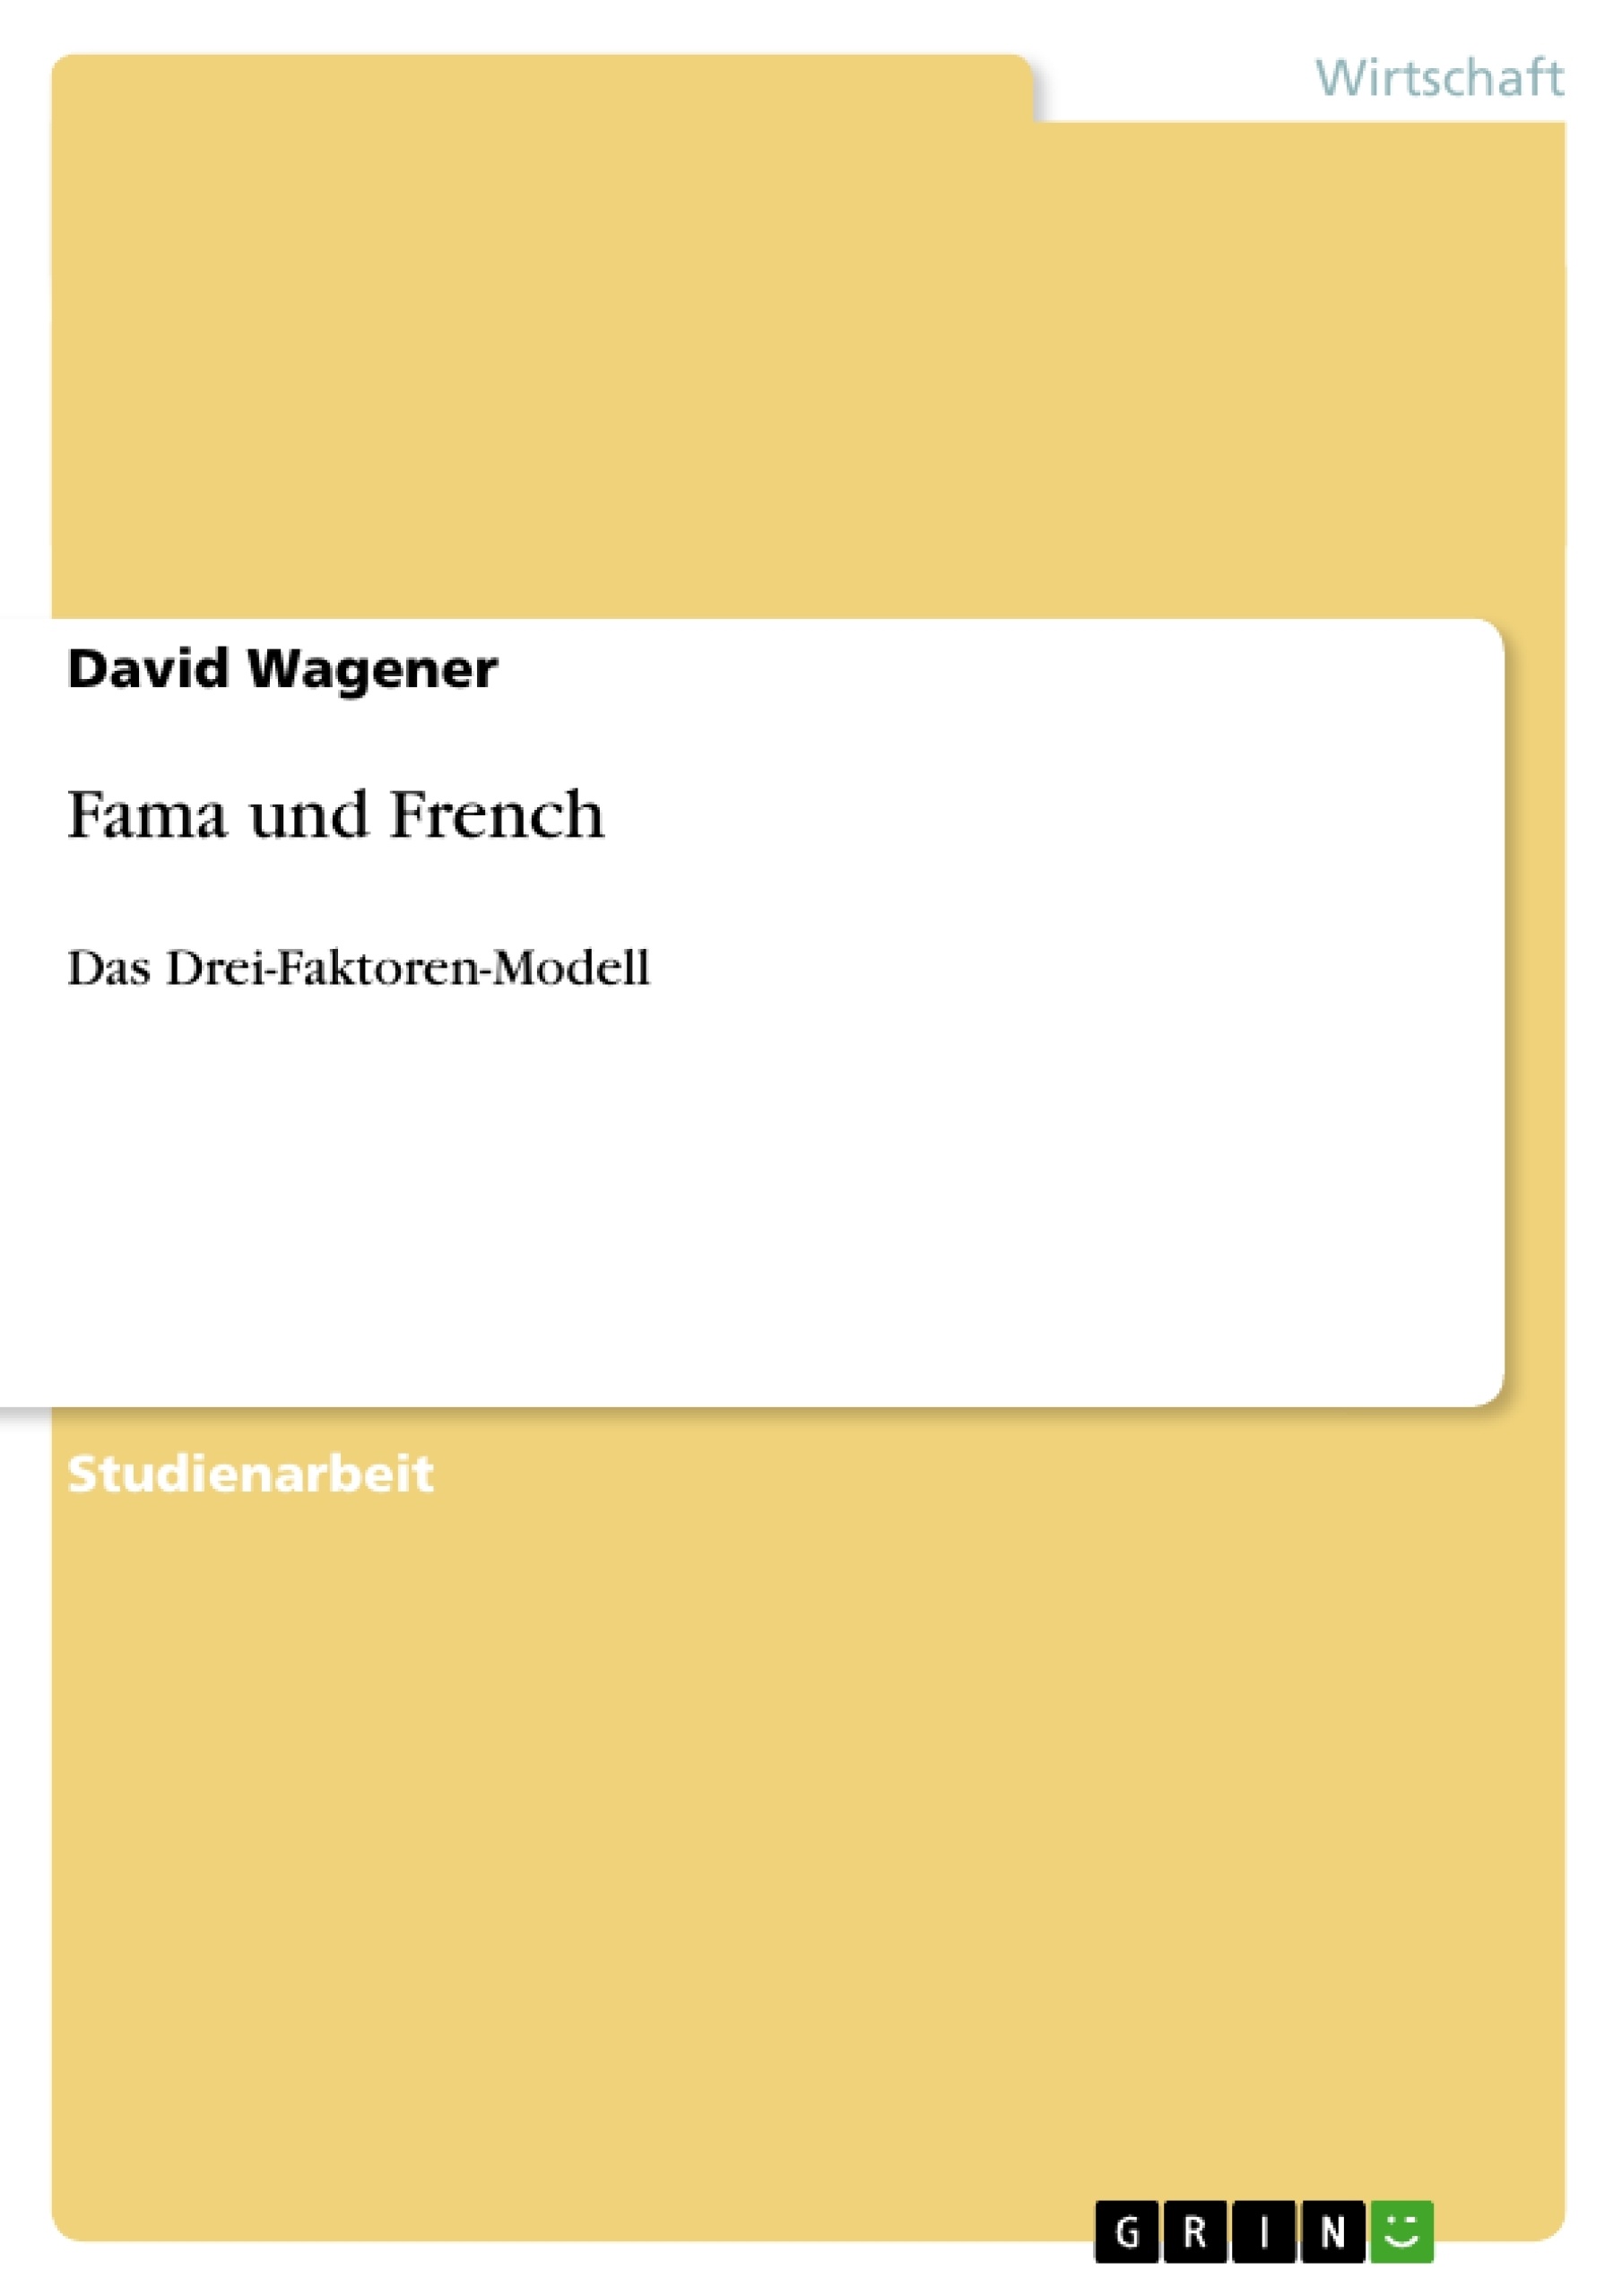 Título: Fama und French